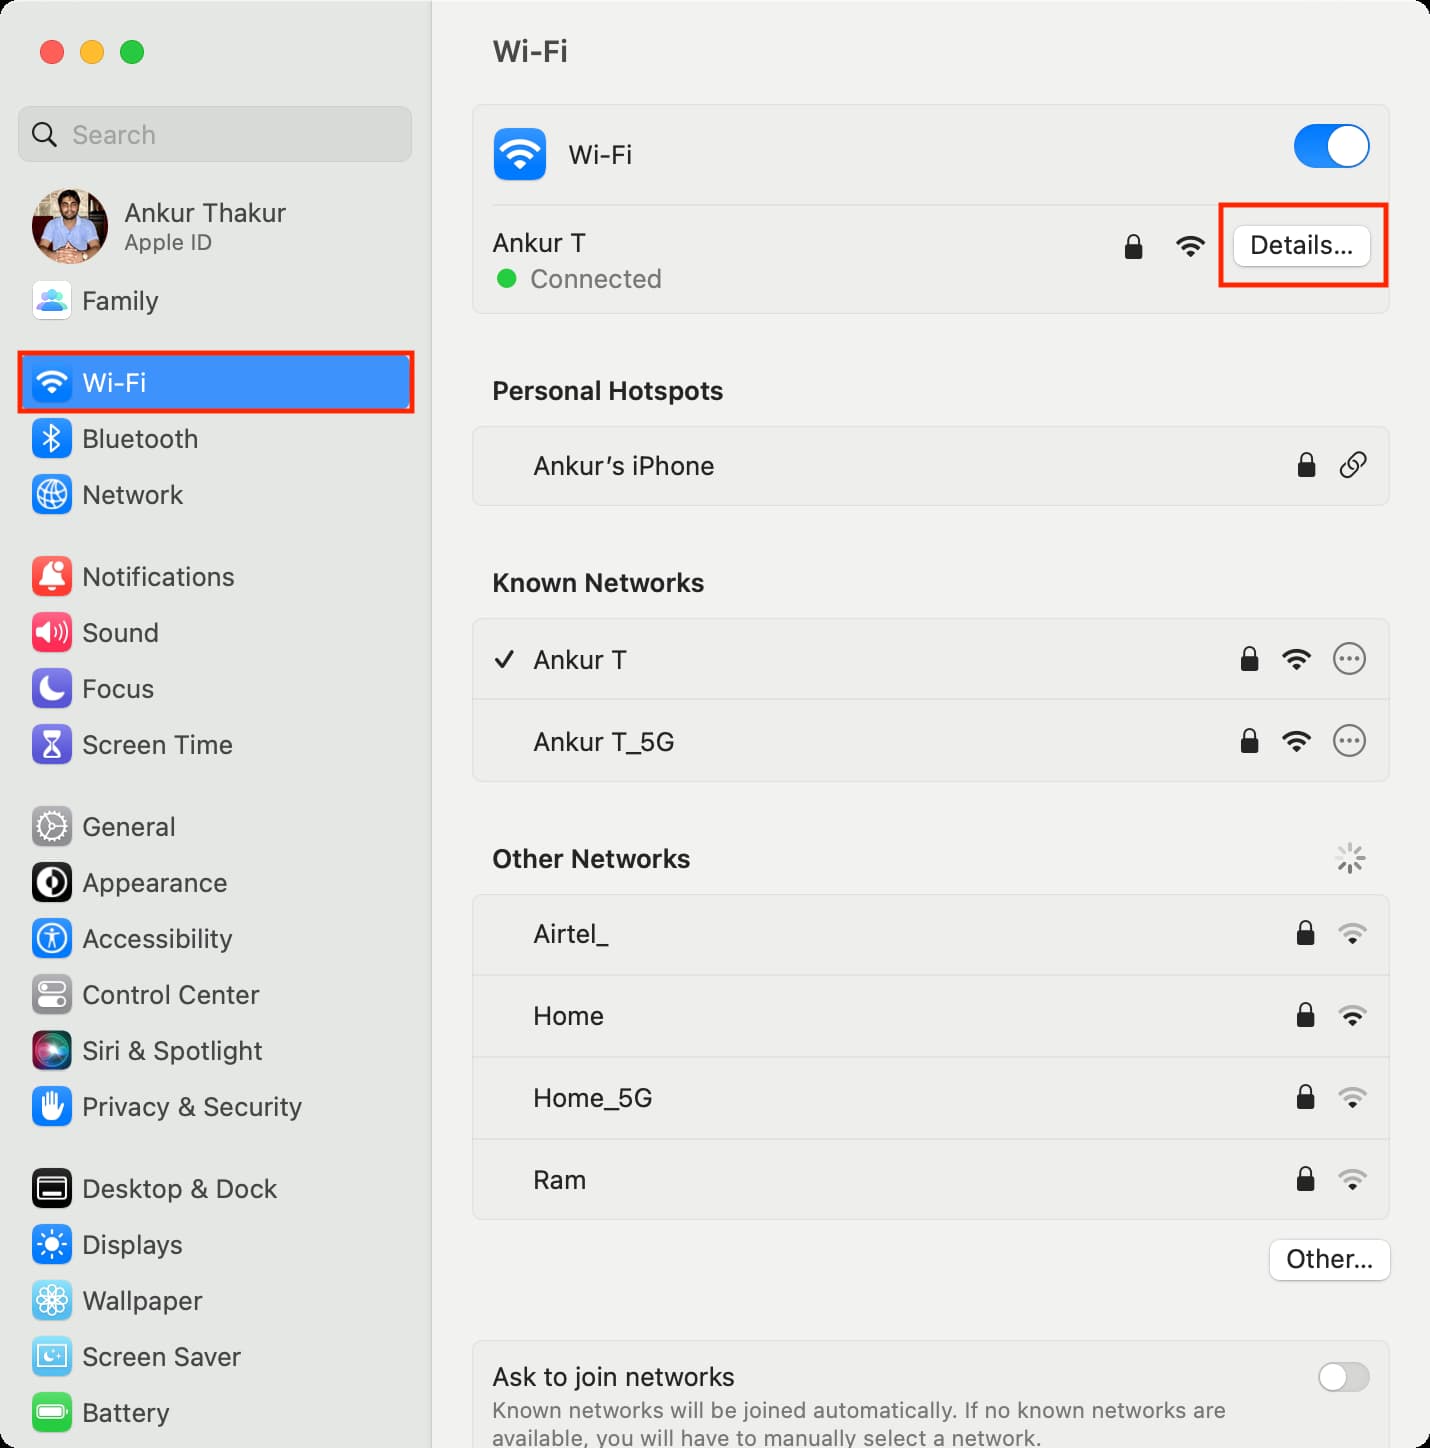 See details of connected Wi-Fi on Mac